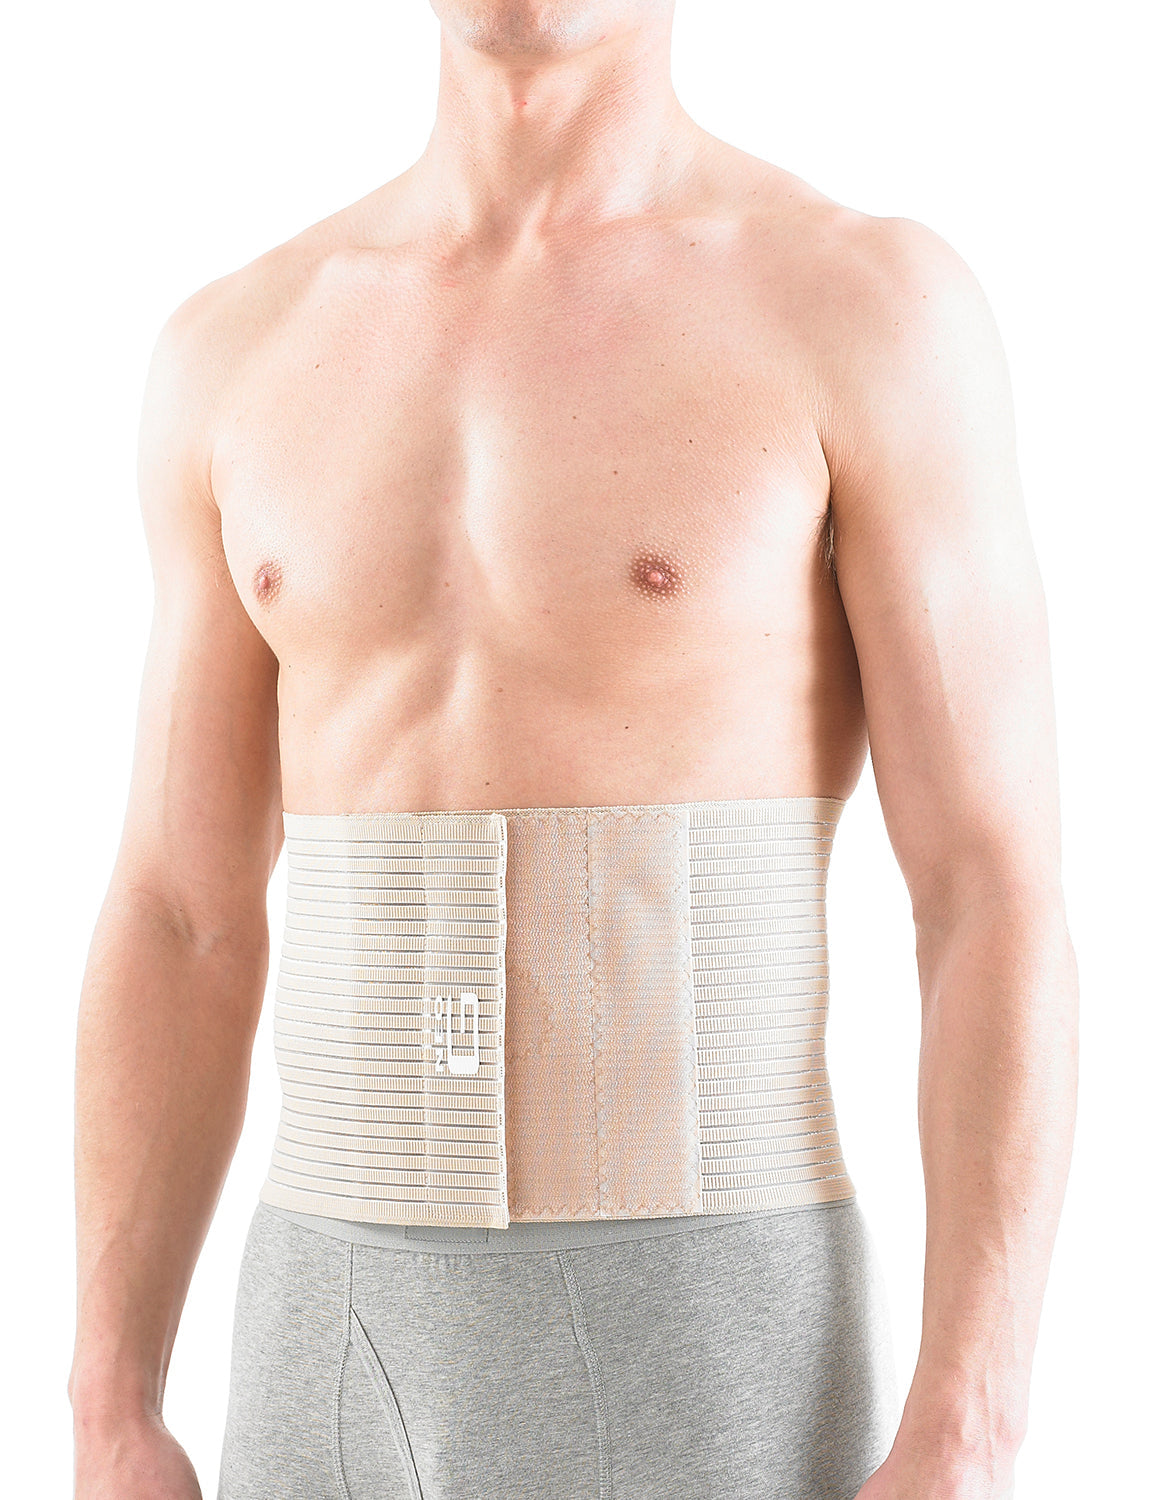 Hernia Compression Underwear & Pads - Including free hernia pads - Orthotix  UK